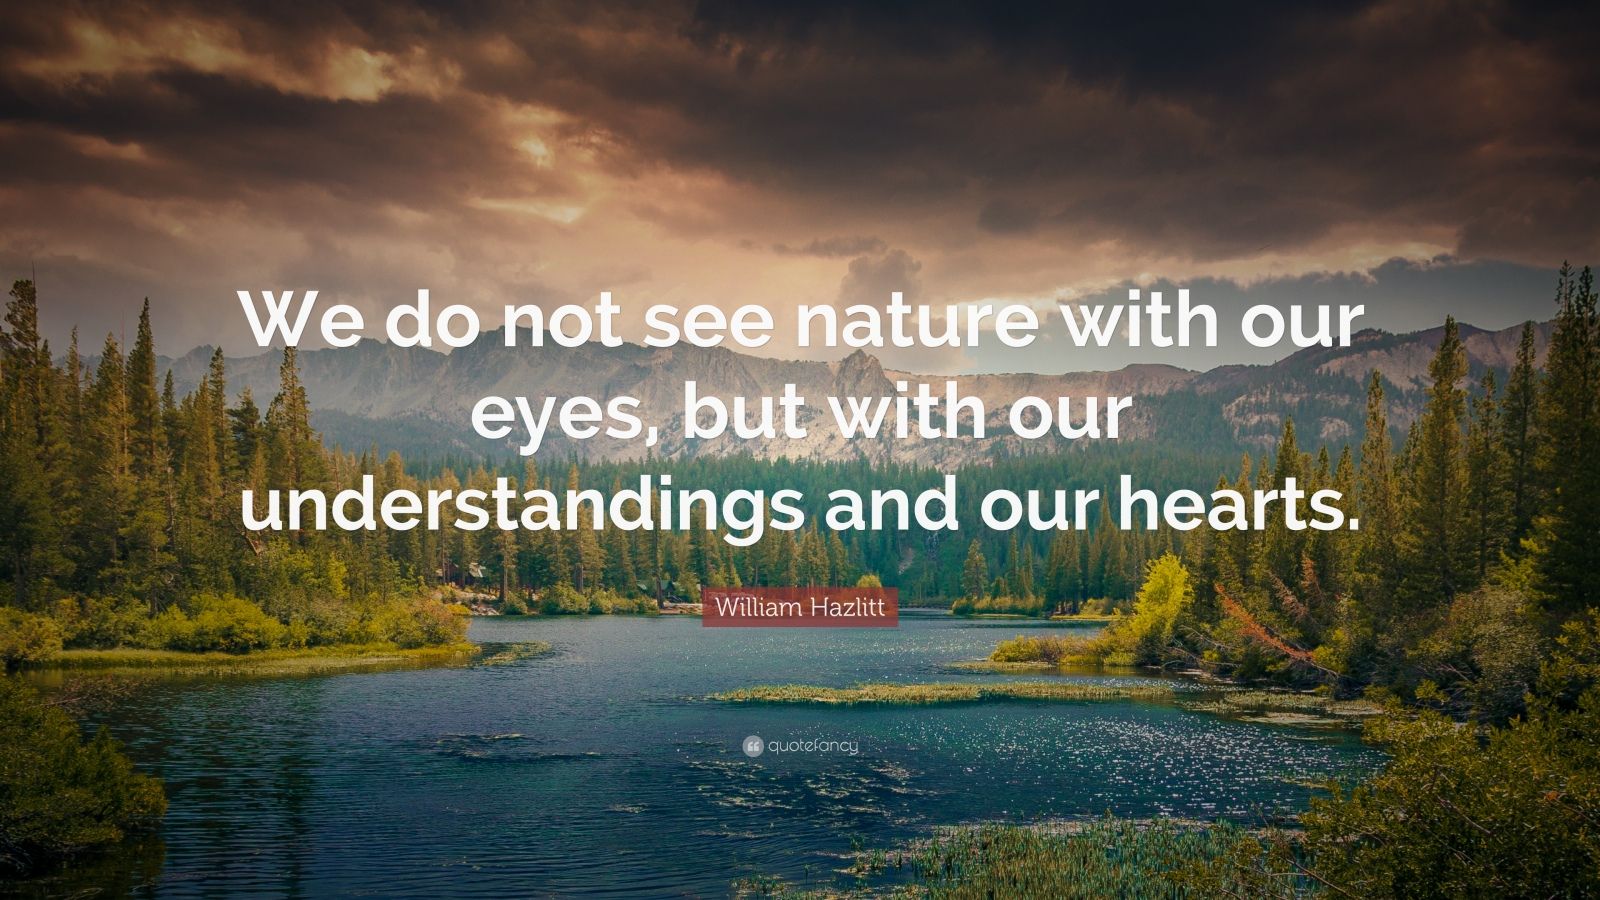 Nature Quotes (32 wallpapers) - Quotefancy